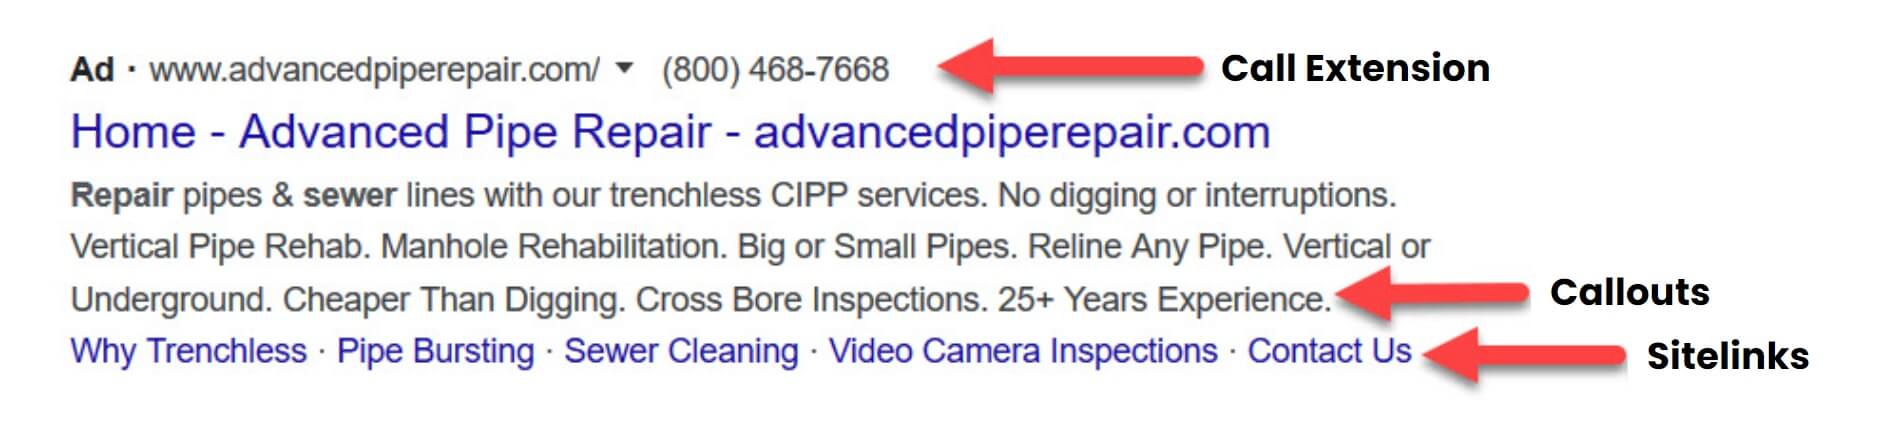 Google Ads Ad Extensions